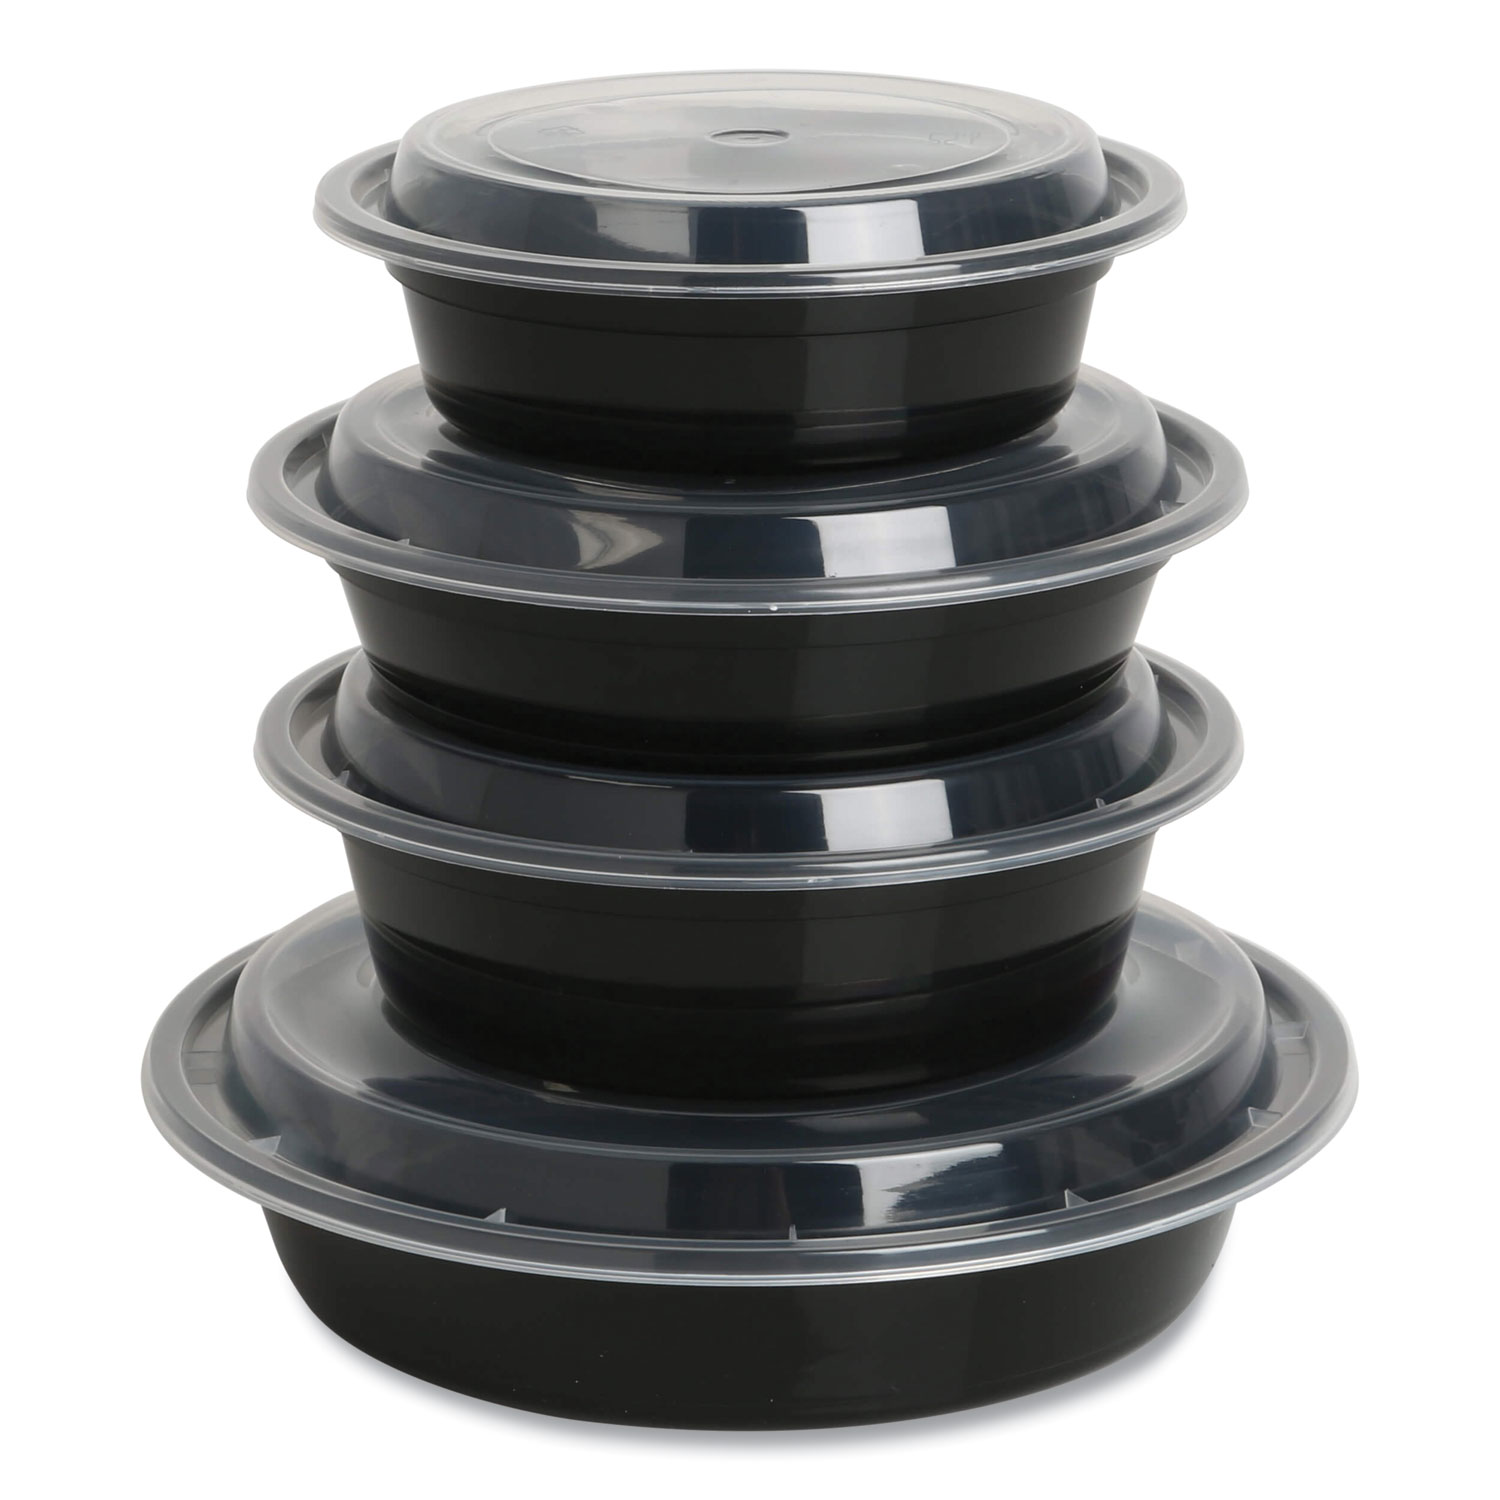 7 x 2 – 32 OZ - Round Plastic Food Takeout Containers - Black Base/Clear Lid